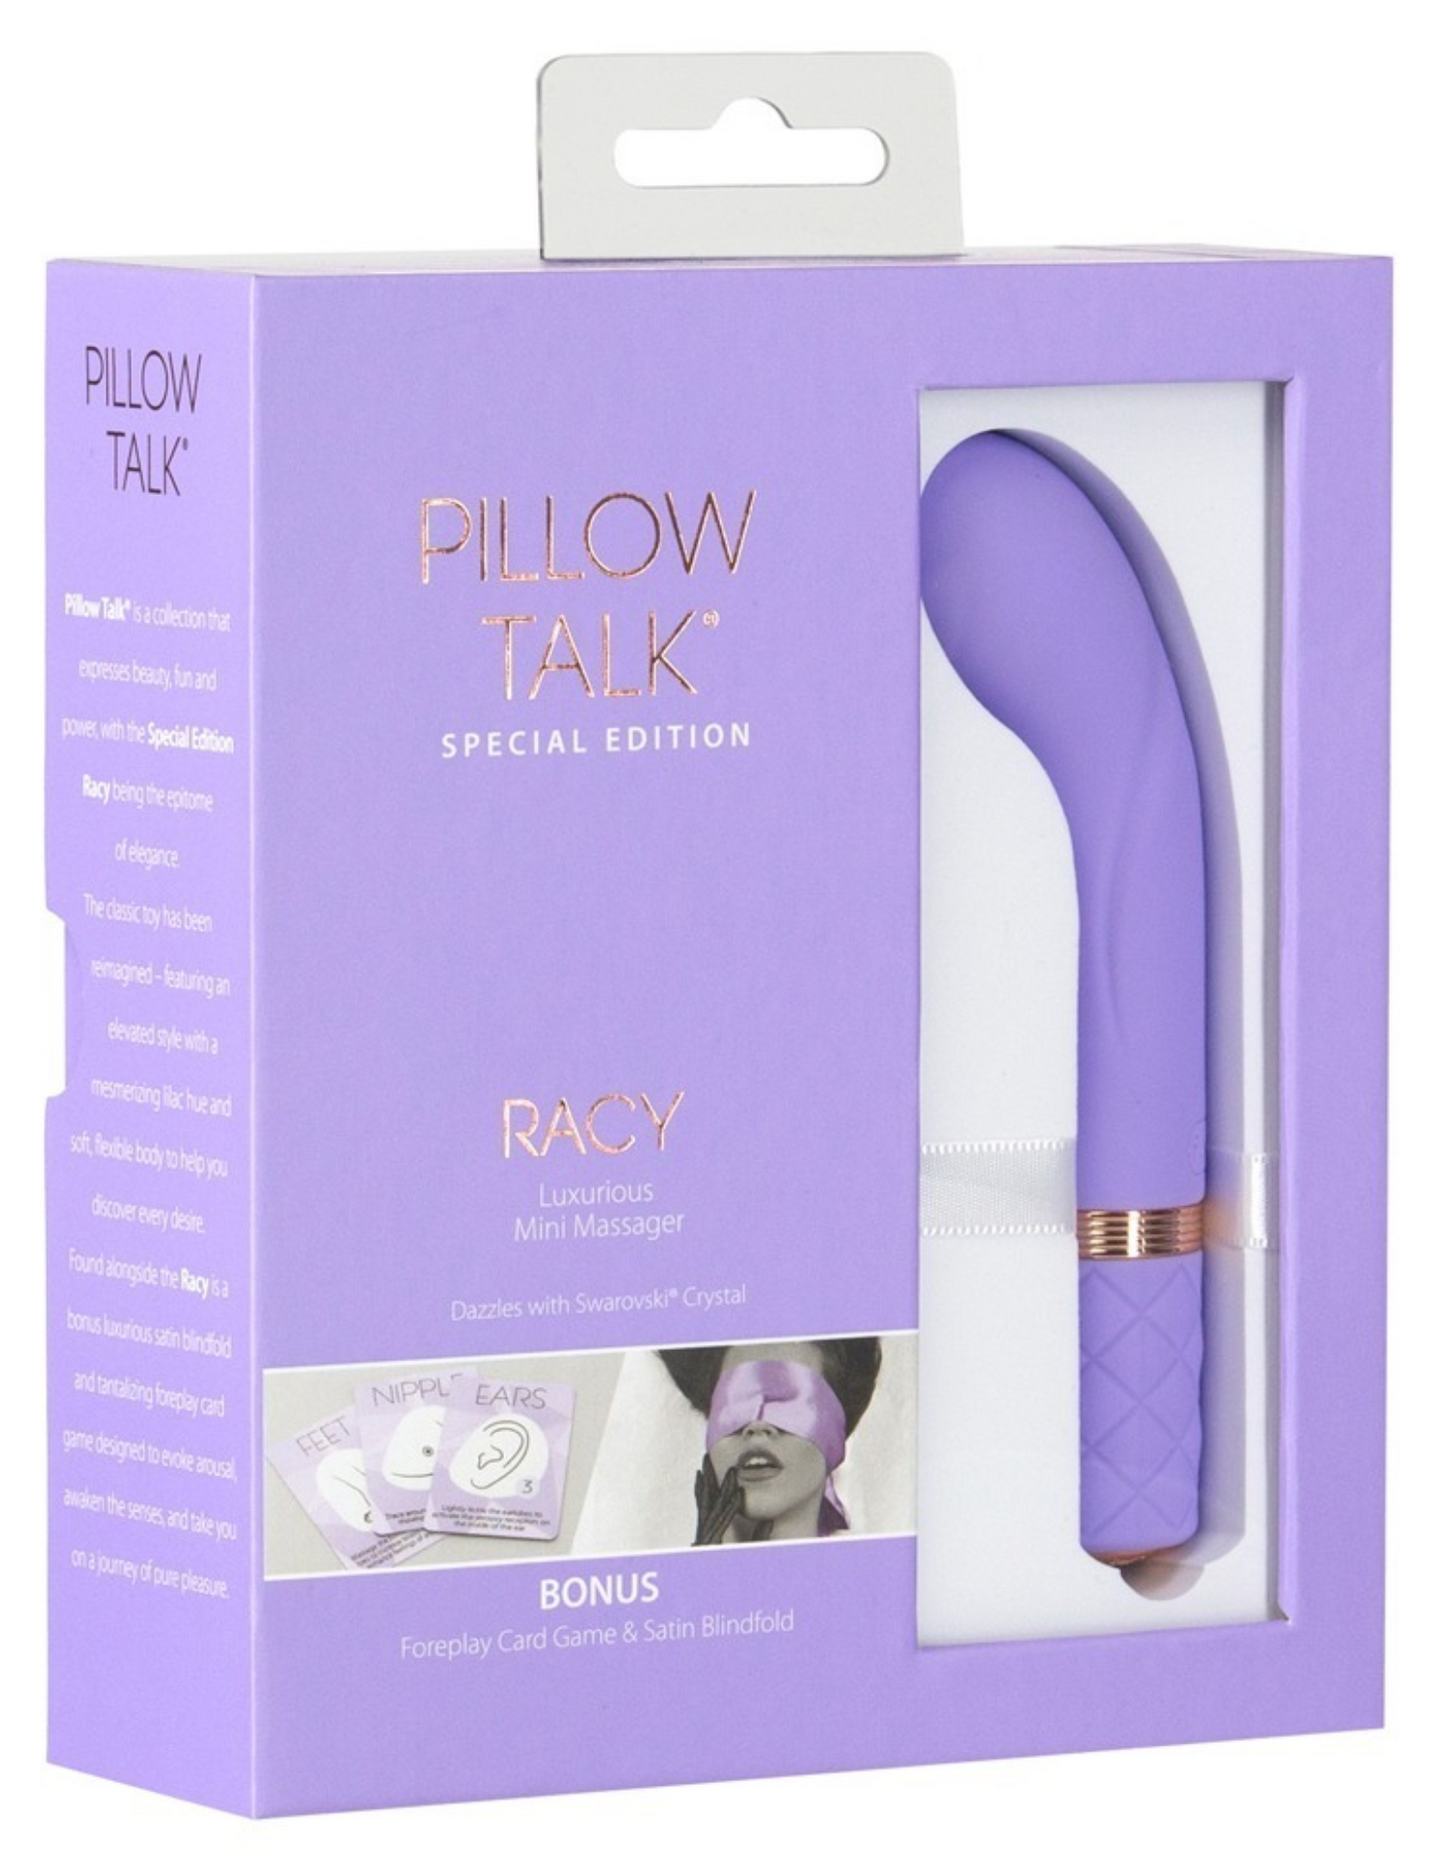 Photo of the front of the box for the Pillow Talk Racy bullet from BMS Factory (purple).